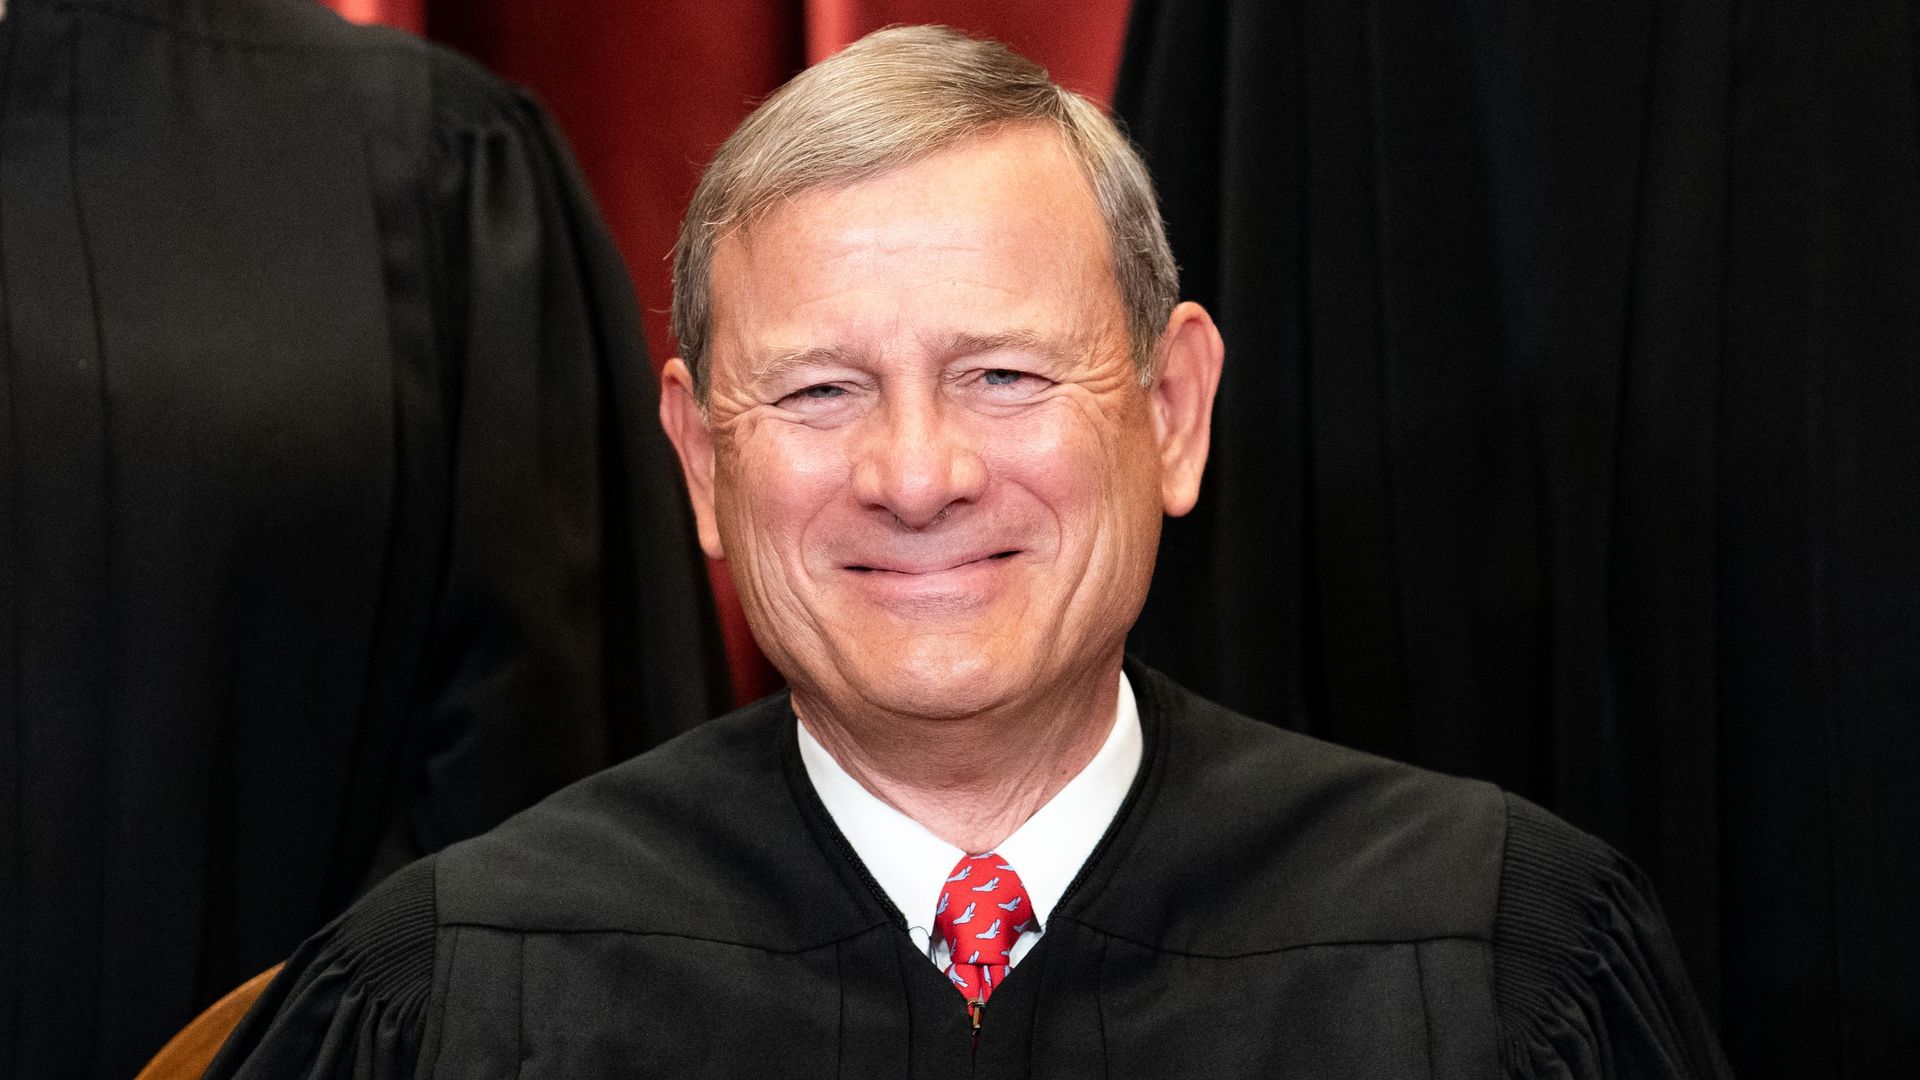 Chief Justice John Roberts sits during a group photo of the Justices at the Supreme Court in Washington, DC on April 23, 2021